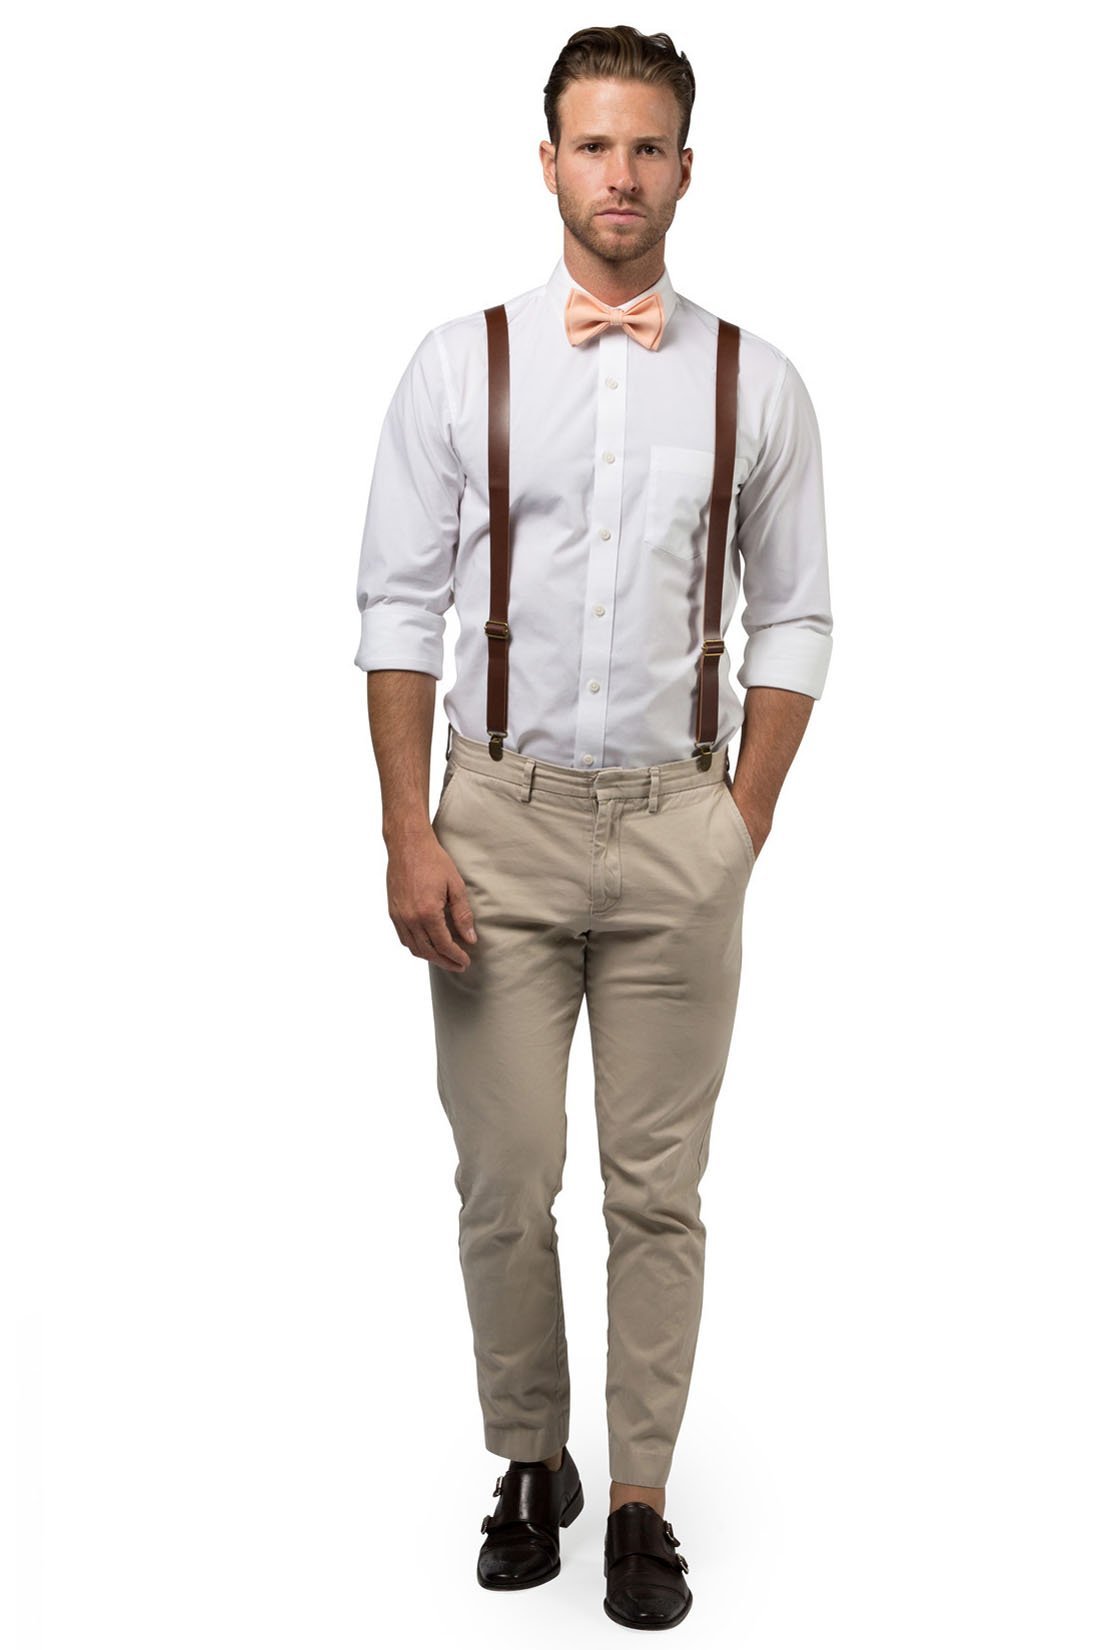 Brown Leather Suspenders & Peach Bow Tie - Baby to Adult Sizes– Armoniia